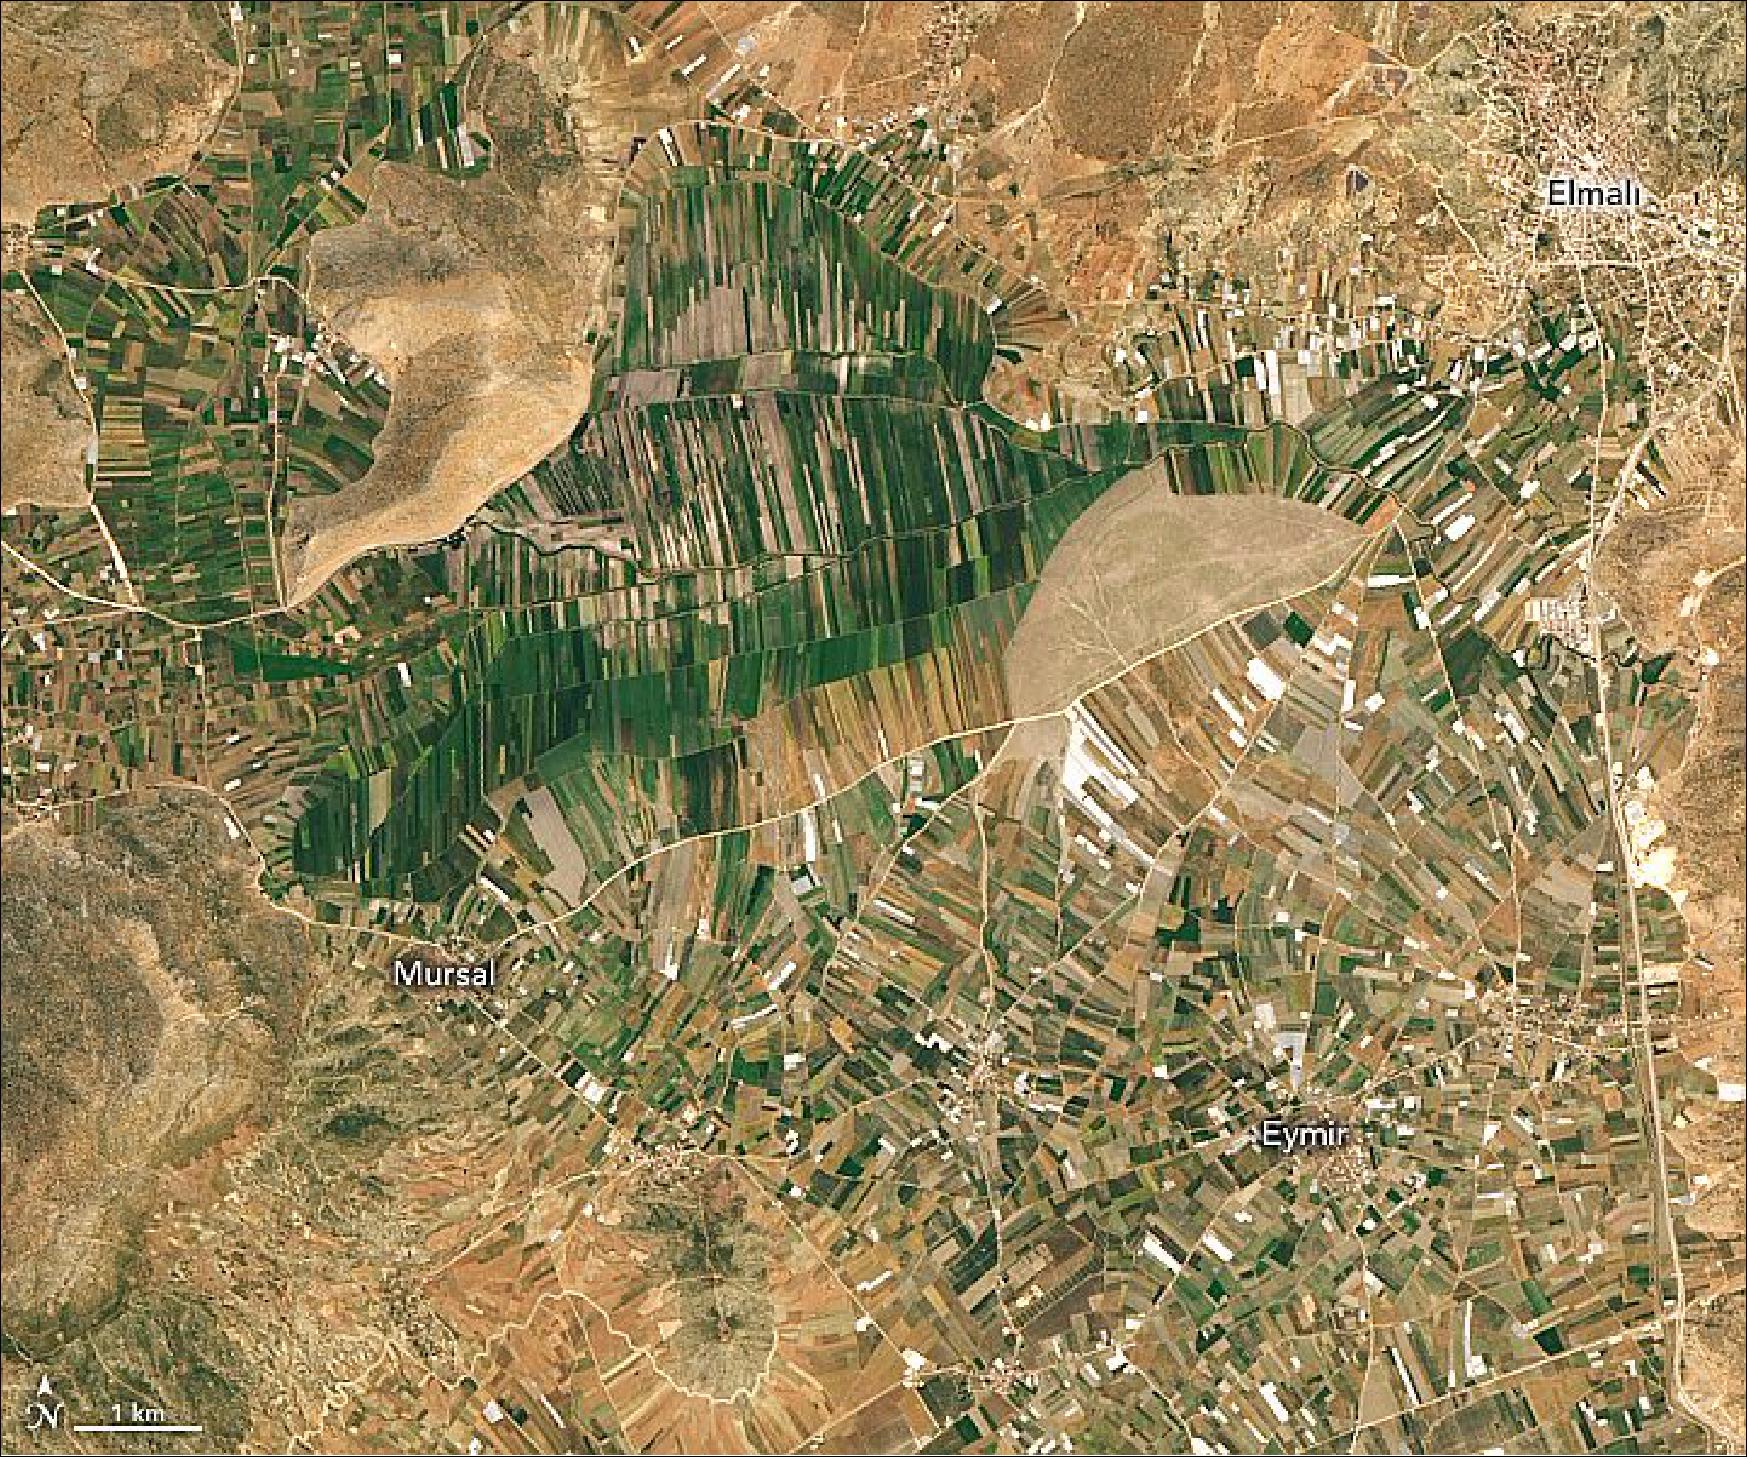 Figure 52: The images show two important agricultural districts of the Antalya province as they appeared on June 8, 2020, to the OLI on Landsat-8. Crop production in Antalya is valued around $270 million. This map shows farms in the district of Elmalı, where the town of the same name sits at the top of a long upland valley. Elmalı, which means “apple,” produces around 12 percent of Turkey’s apples, as well as the local chickpea snack leblebi (NASA Earth Observatory, images by Lauren Dauphin, using Landsat data from the U.S. Geological Survey. Story by Kasha Patel)